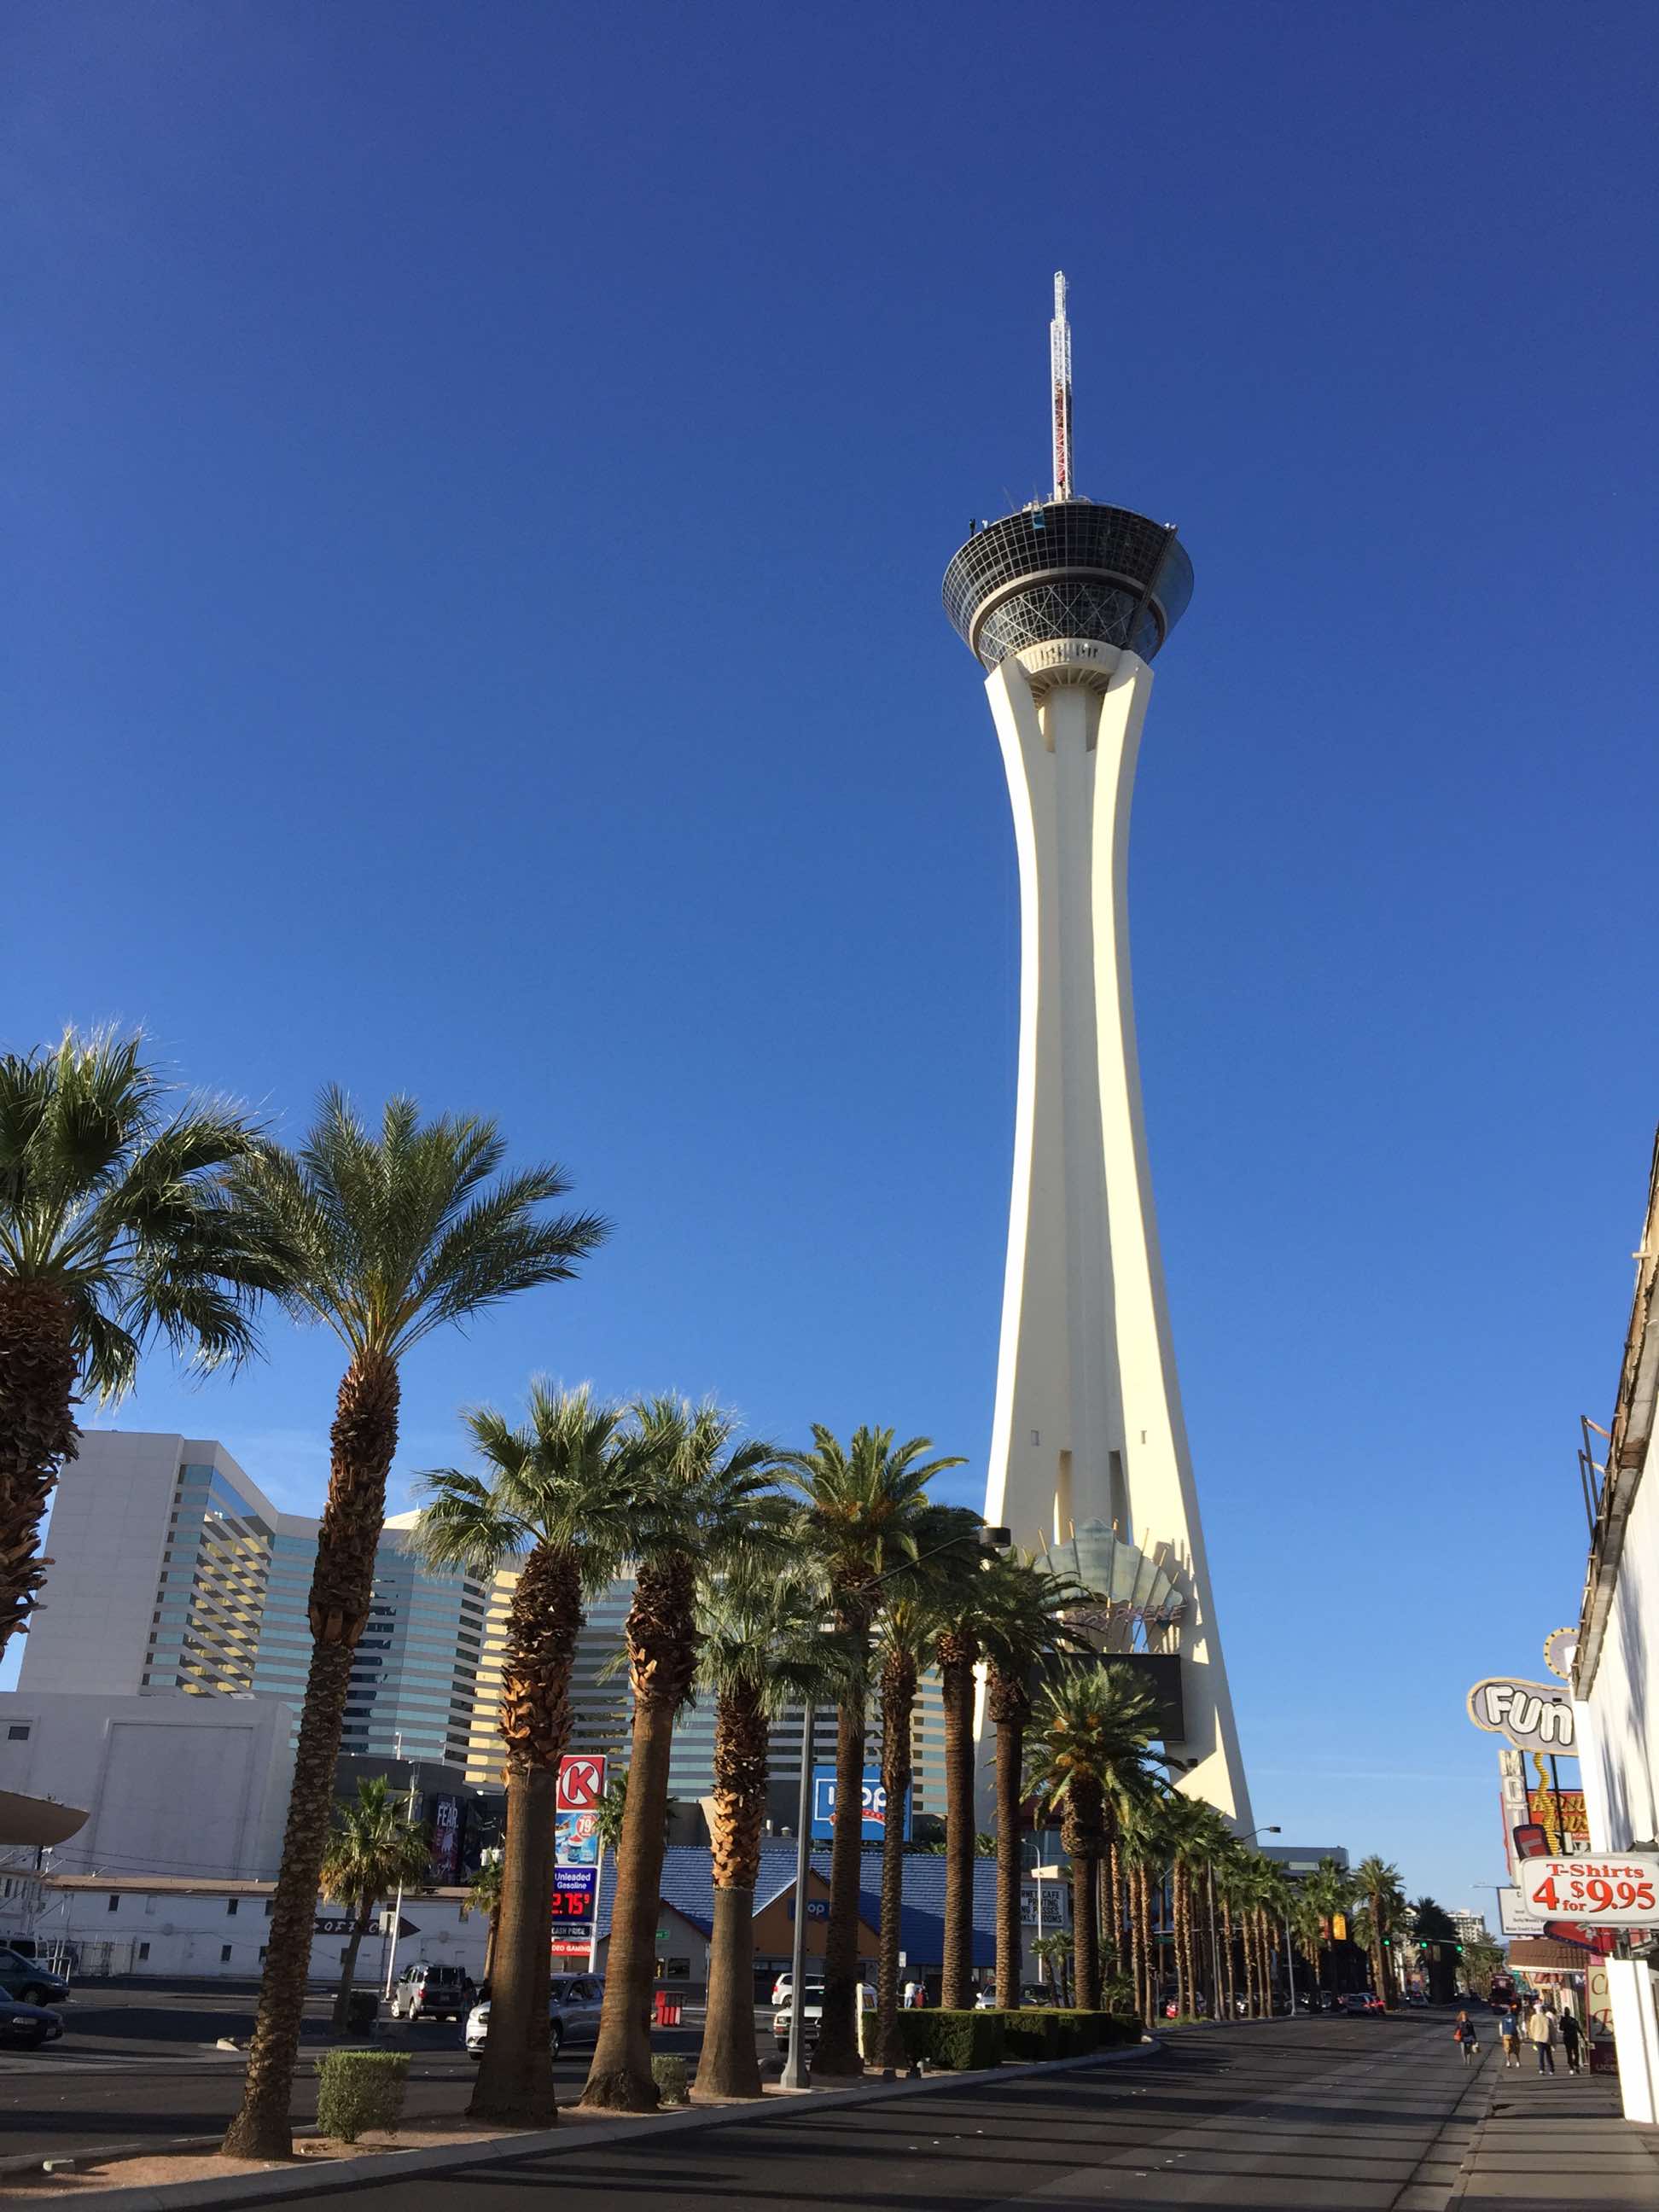 The STRAT Tower and Thrill Rides